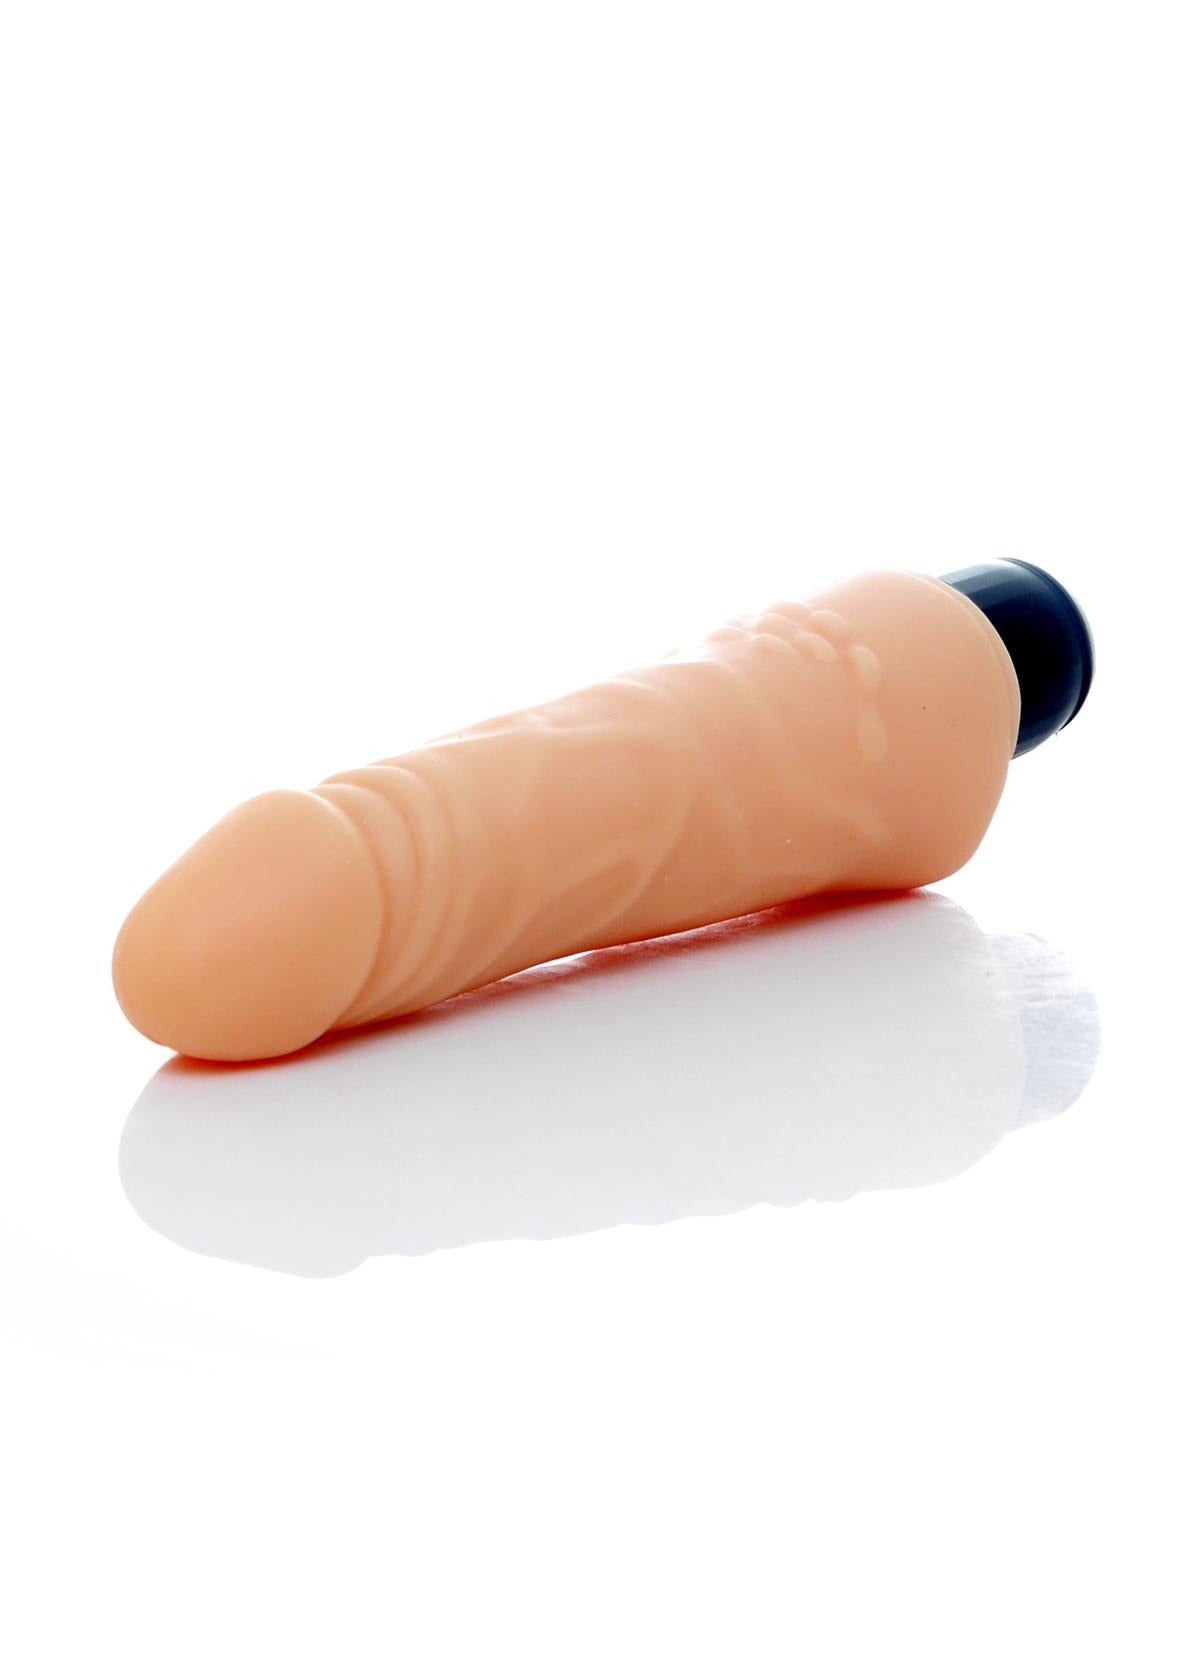 Bossoftoys - Storm 12 Function Realistic vibrator - Cyber leather - Extra ordinary Flexible Material - Flesh - 18,5 cm - 44-00003